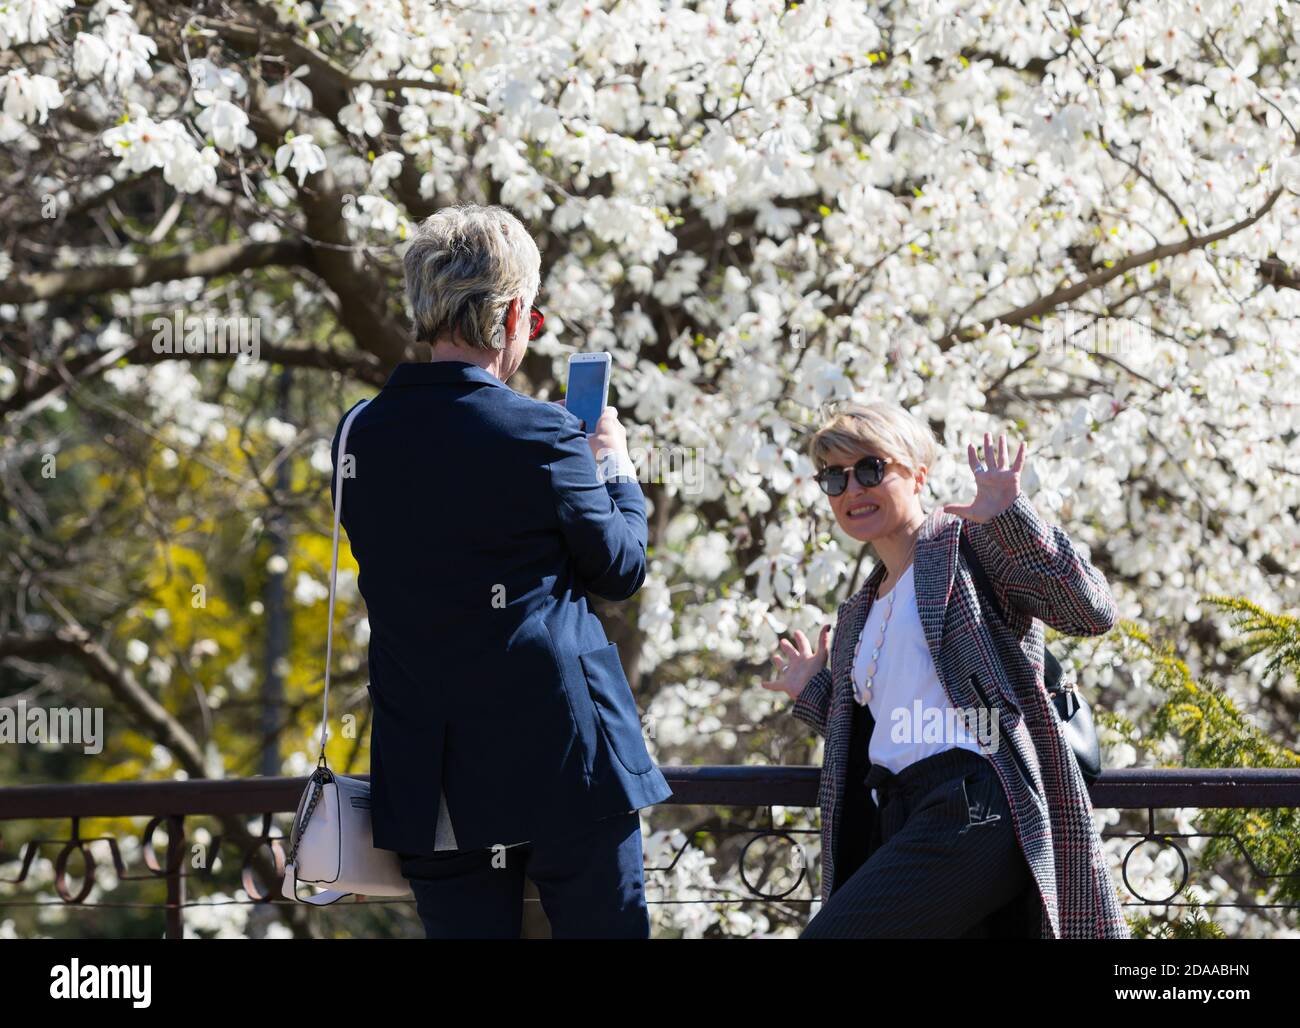 KYIV, UKRAINE - Apr 18, 2018: People enjoy magnolia blossoms. People photograph and making selfies in blossoming magnolia garden. Blossoming magnolia Stock Photo